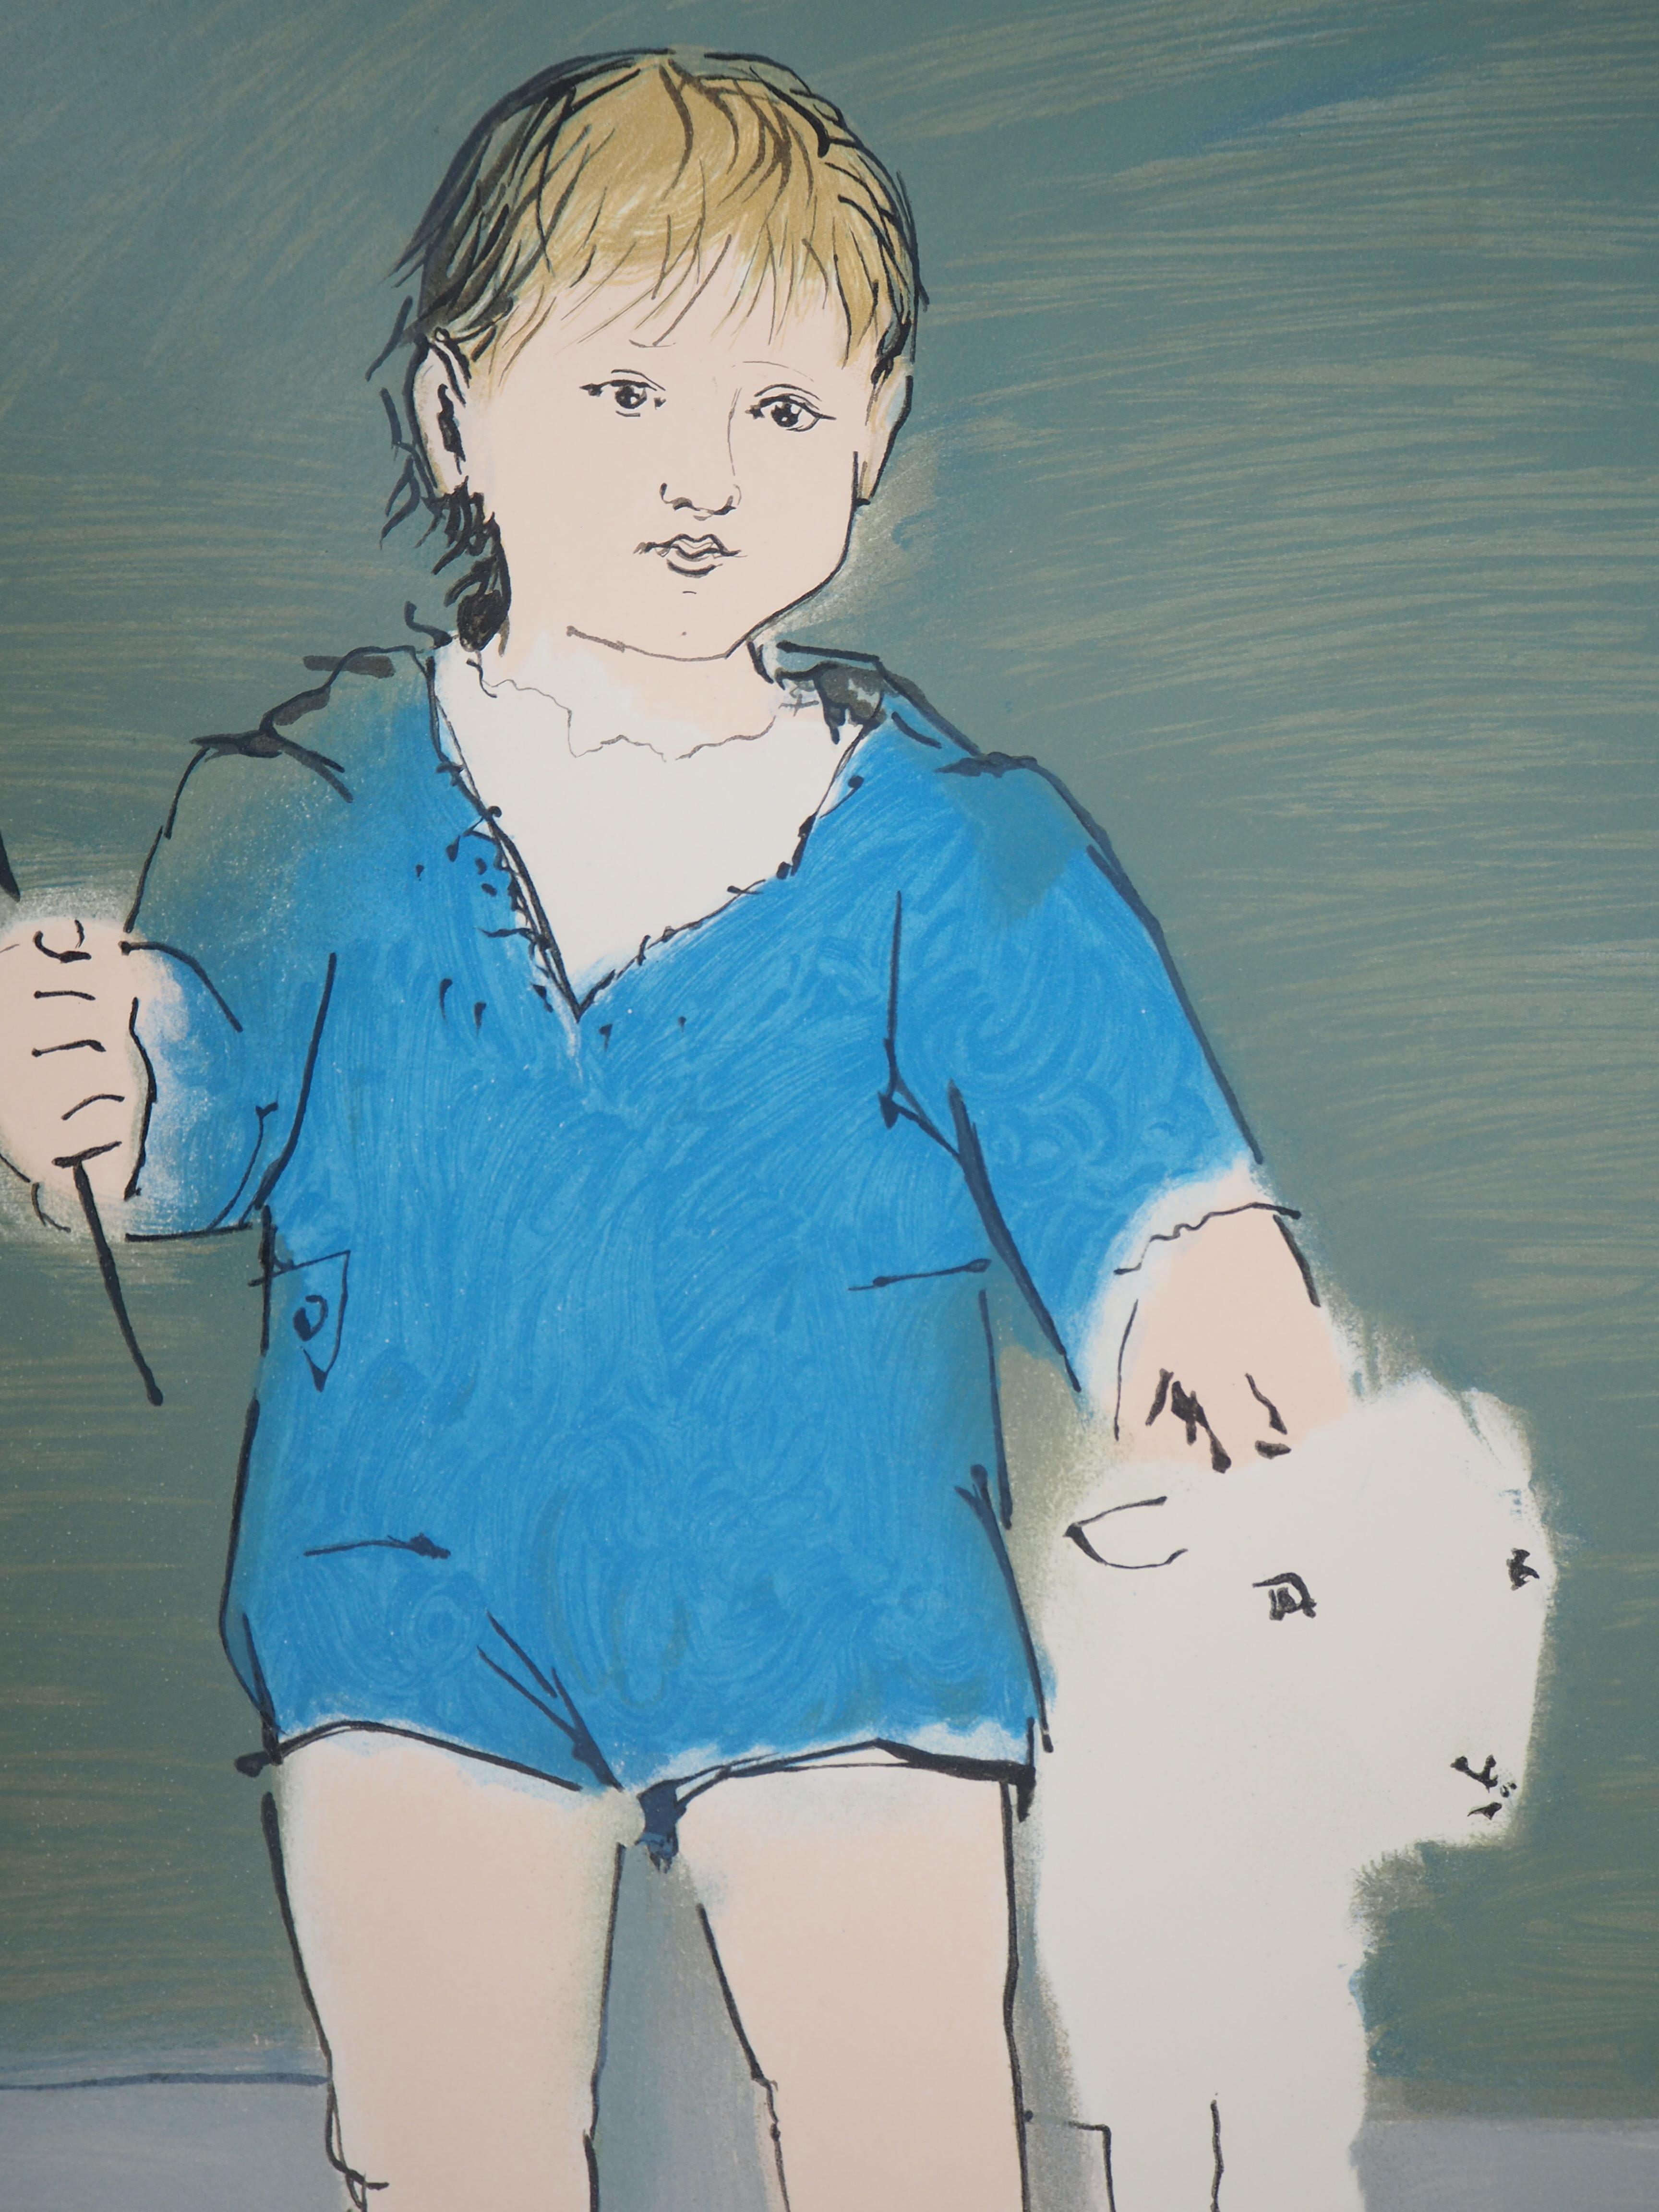 Child with a Lamb - Lithograph (Mourlot) - Gray Figurative Print by Pablo Picasso